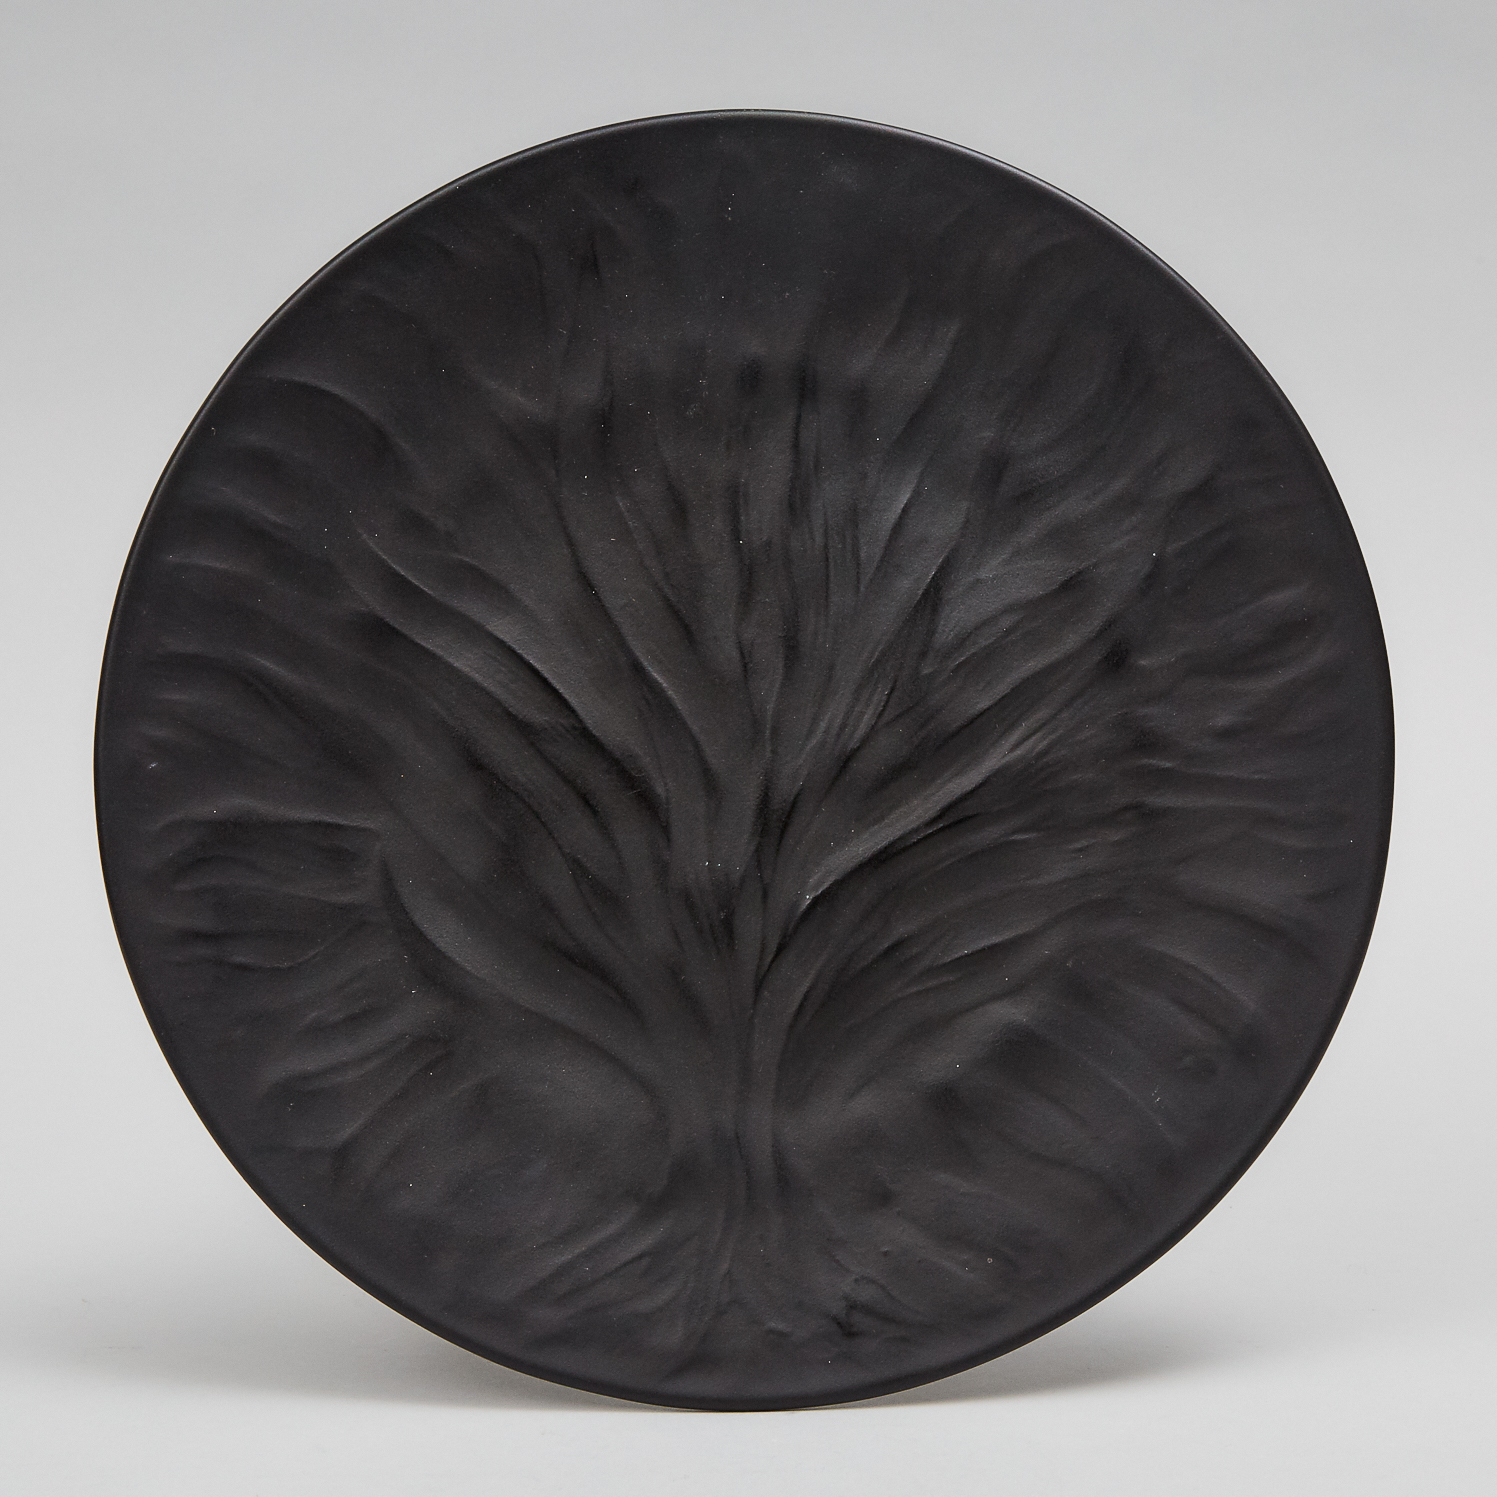 ‘Algues’, Lalique Moulded and Frosted Black Glass Plate, post-1945